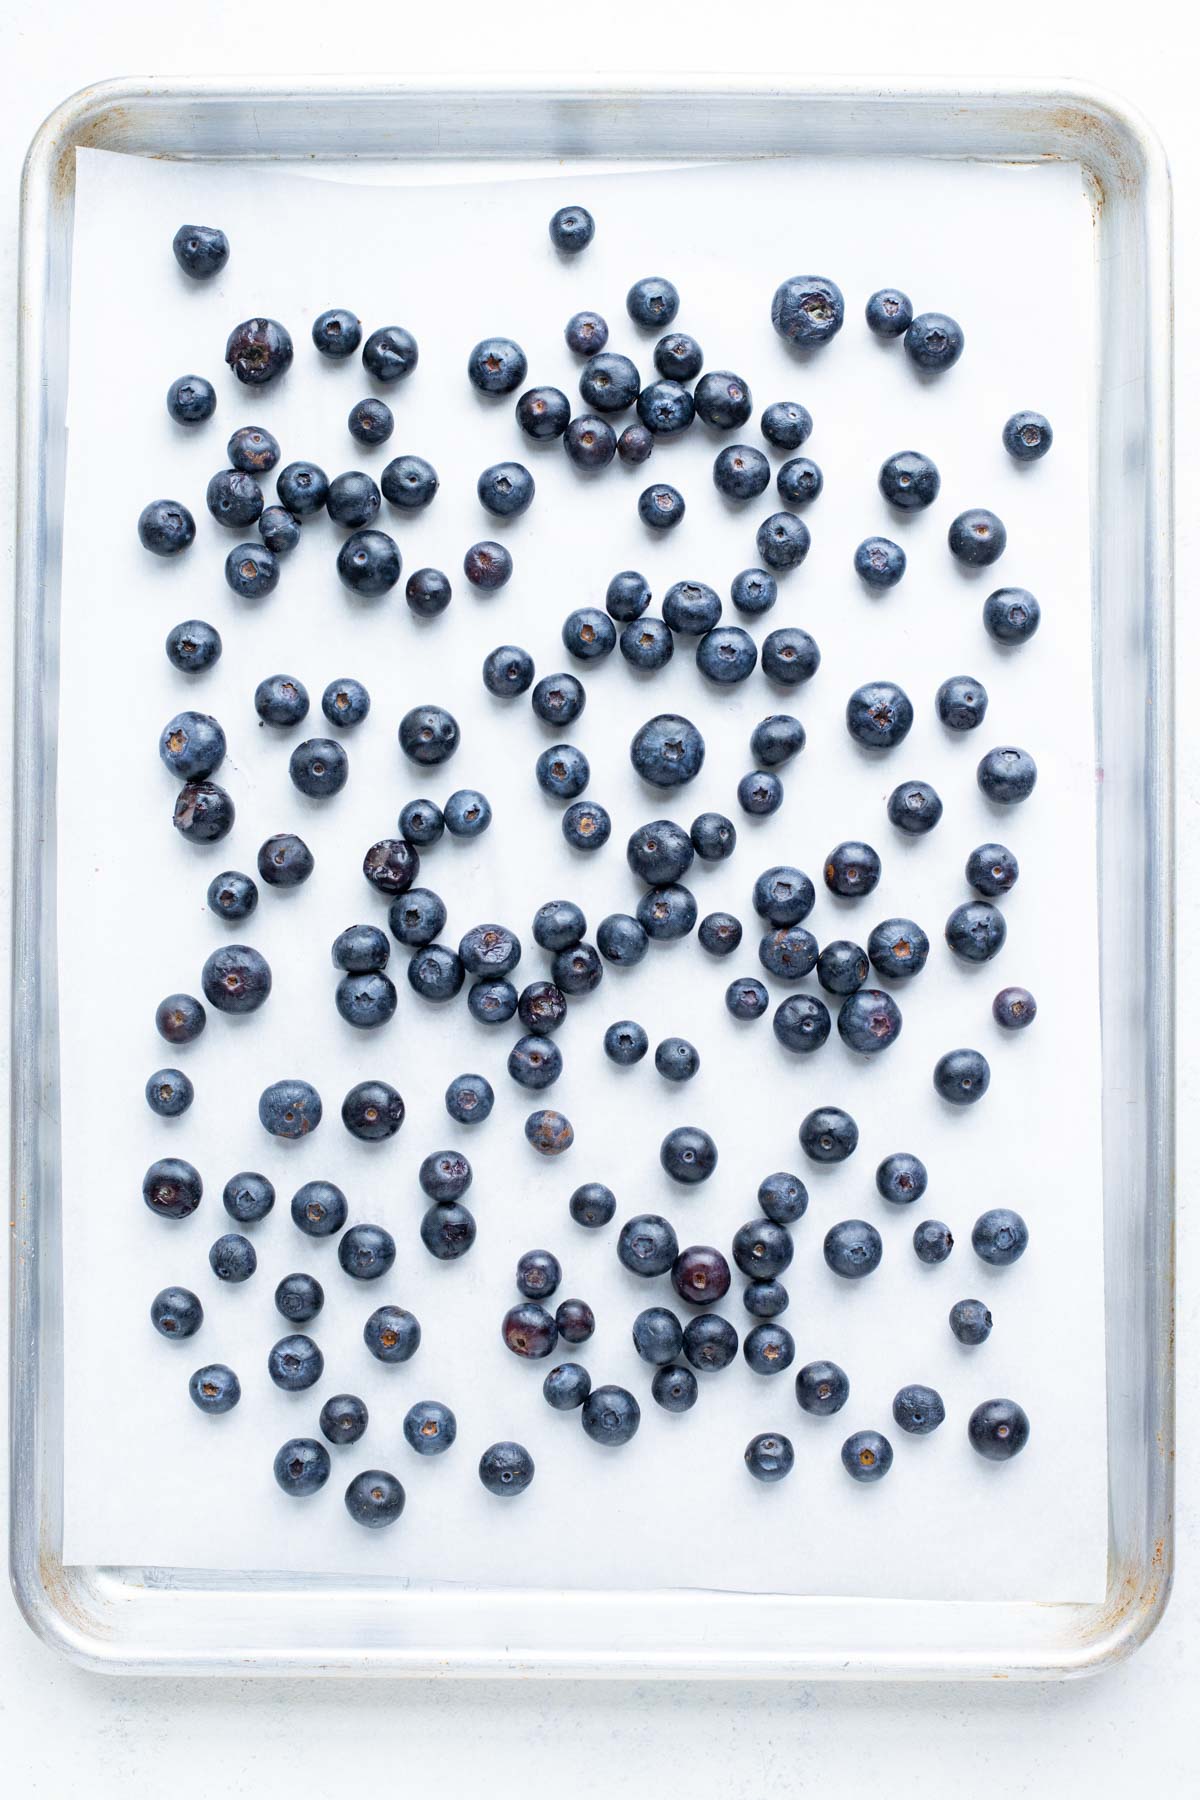 Blueberries are shown overhead in a single layer.